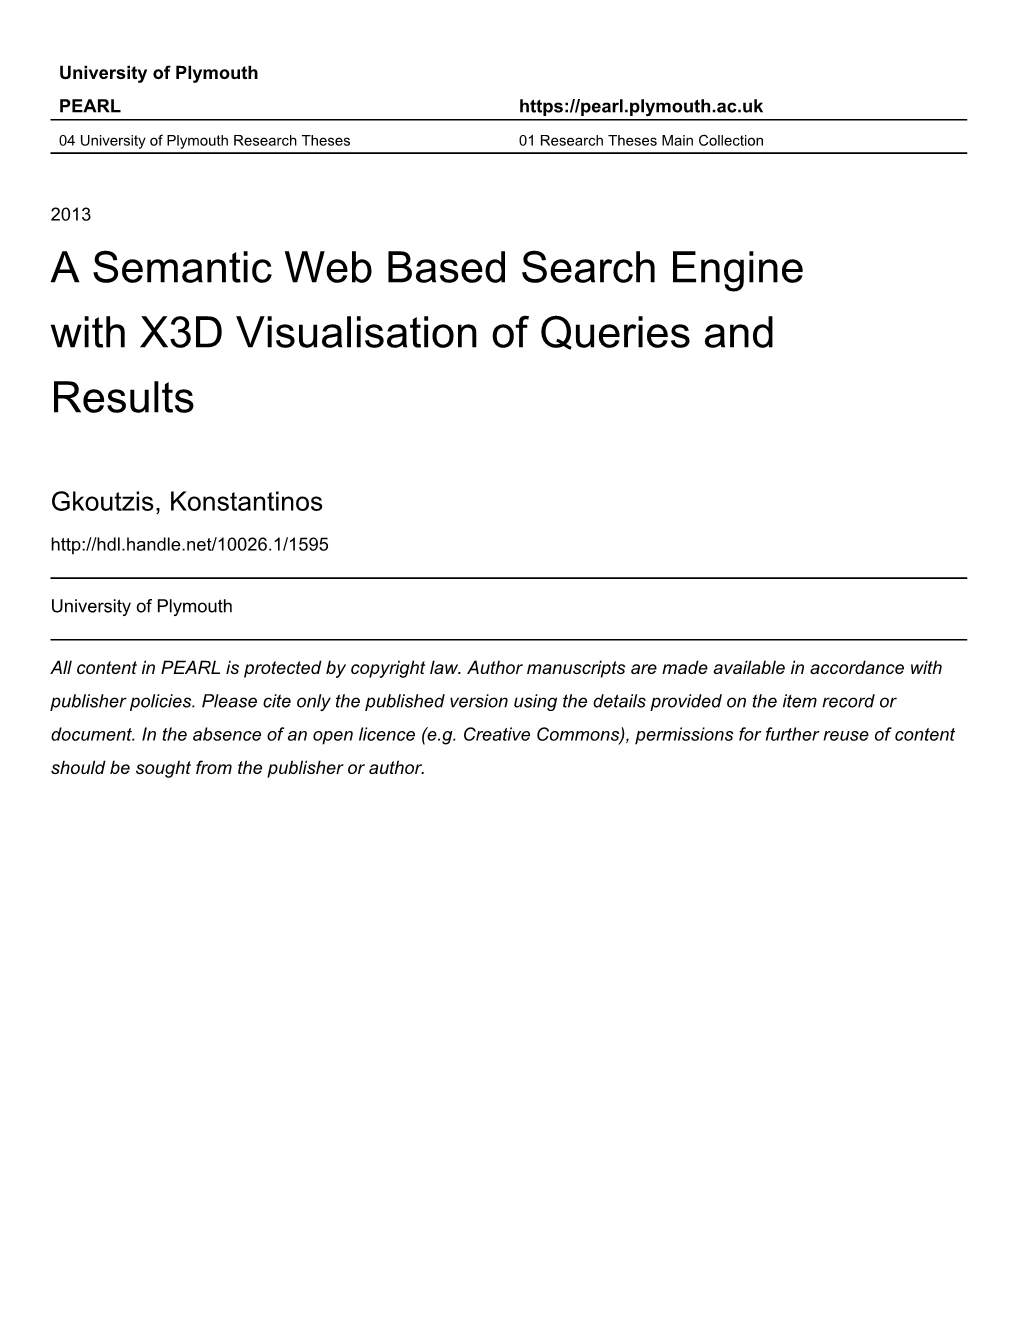 A Semantic Web Based Search Engine with X3D Visualisation of Queries and Results